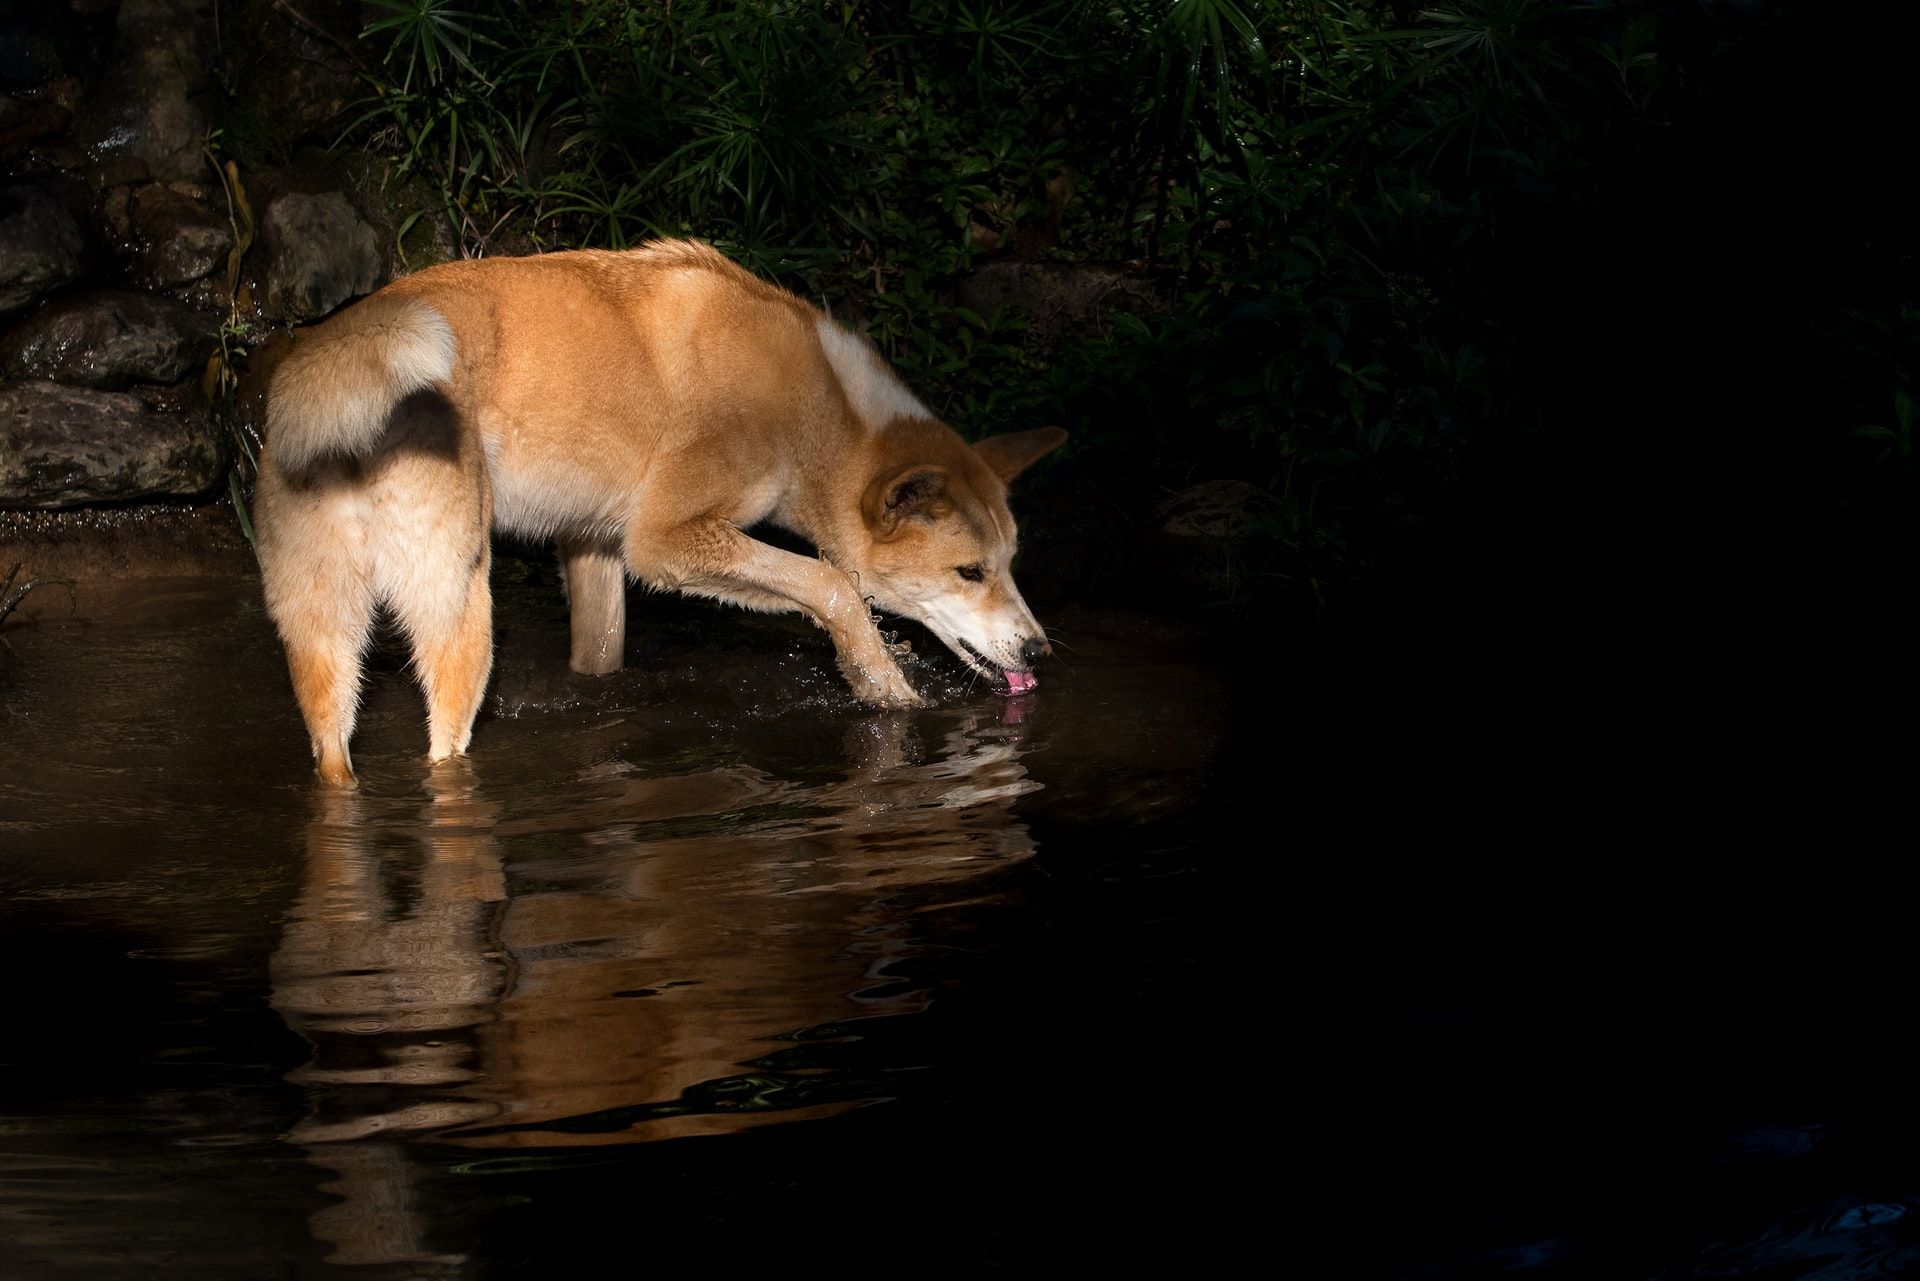 where do dingoes come from what do they eat and do dingoes really eat babies